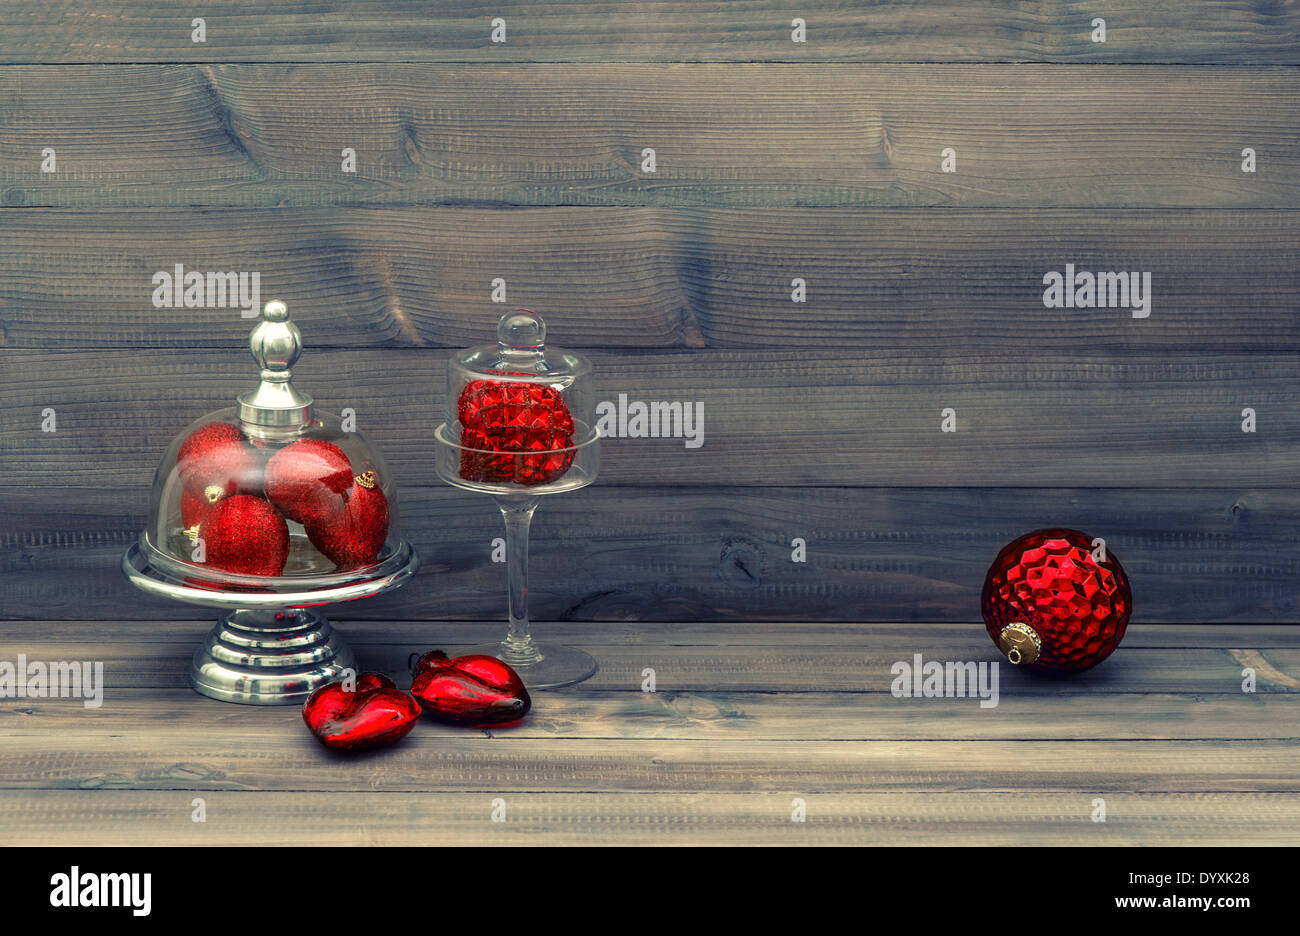 vintage style christmas decoration with red baubles over rustic wooden background. nostalgic still life Stock Photo